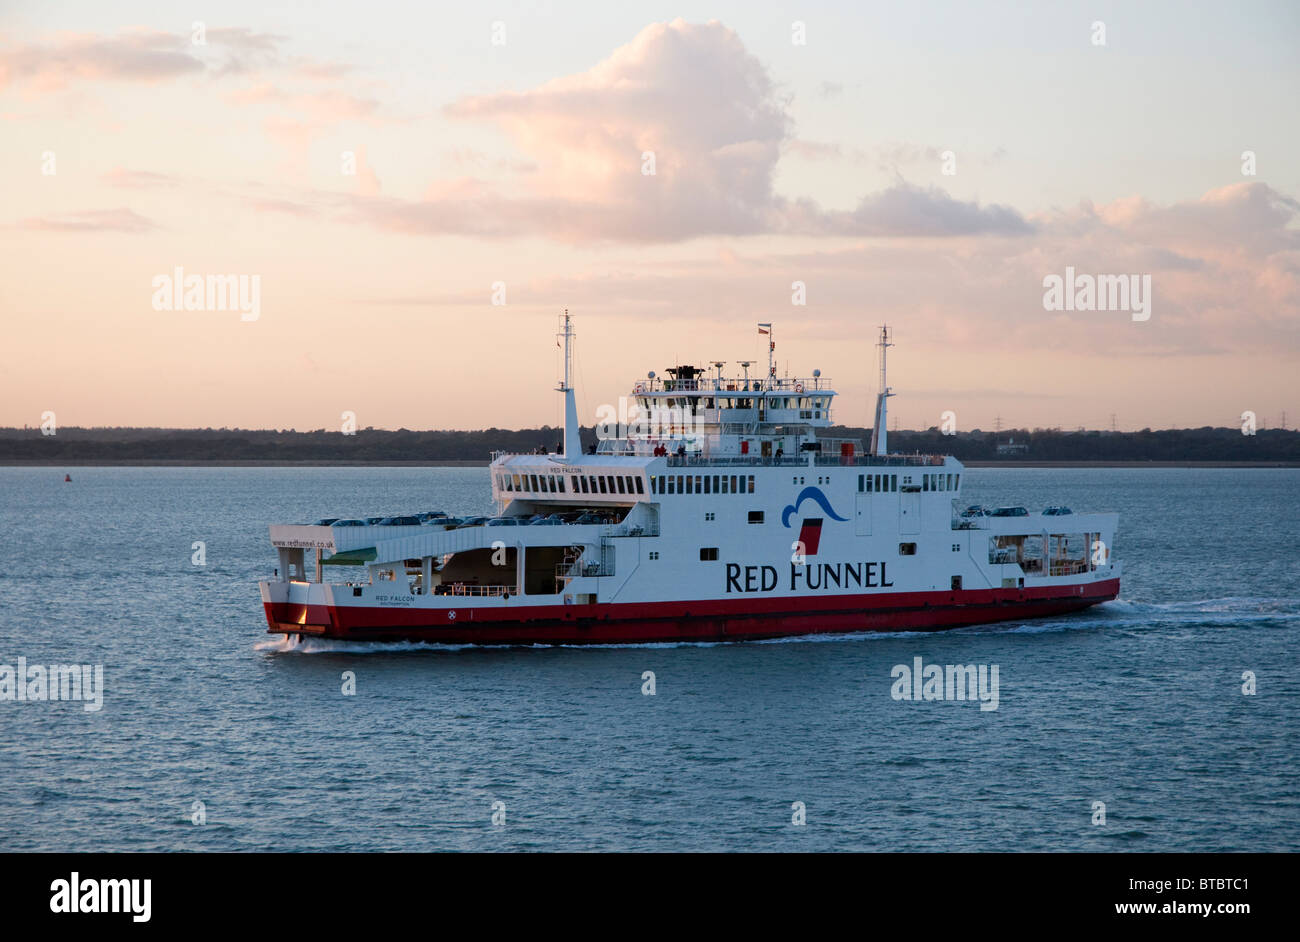 The Red Falcon, one of the ferries operated by Red Funnel, taking passengers and cars to the Isle of Wight, Evening light. Stock Photo